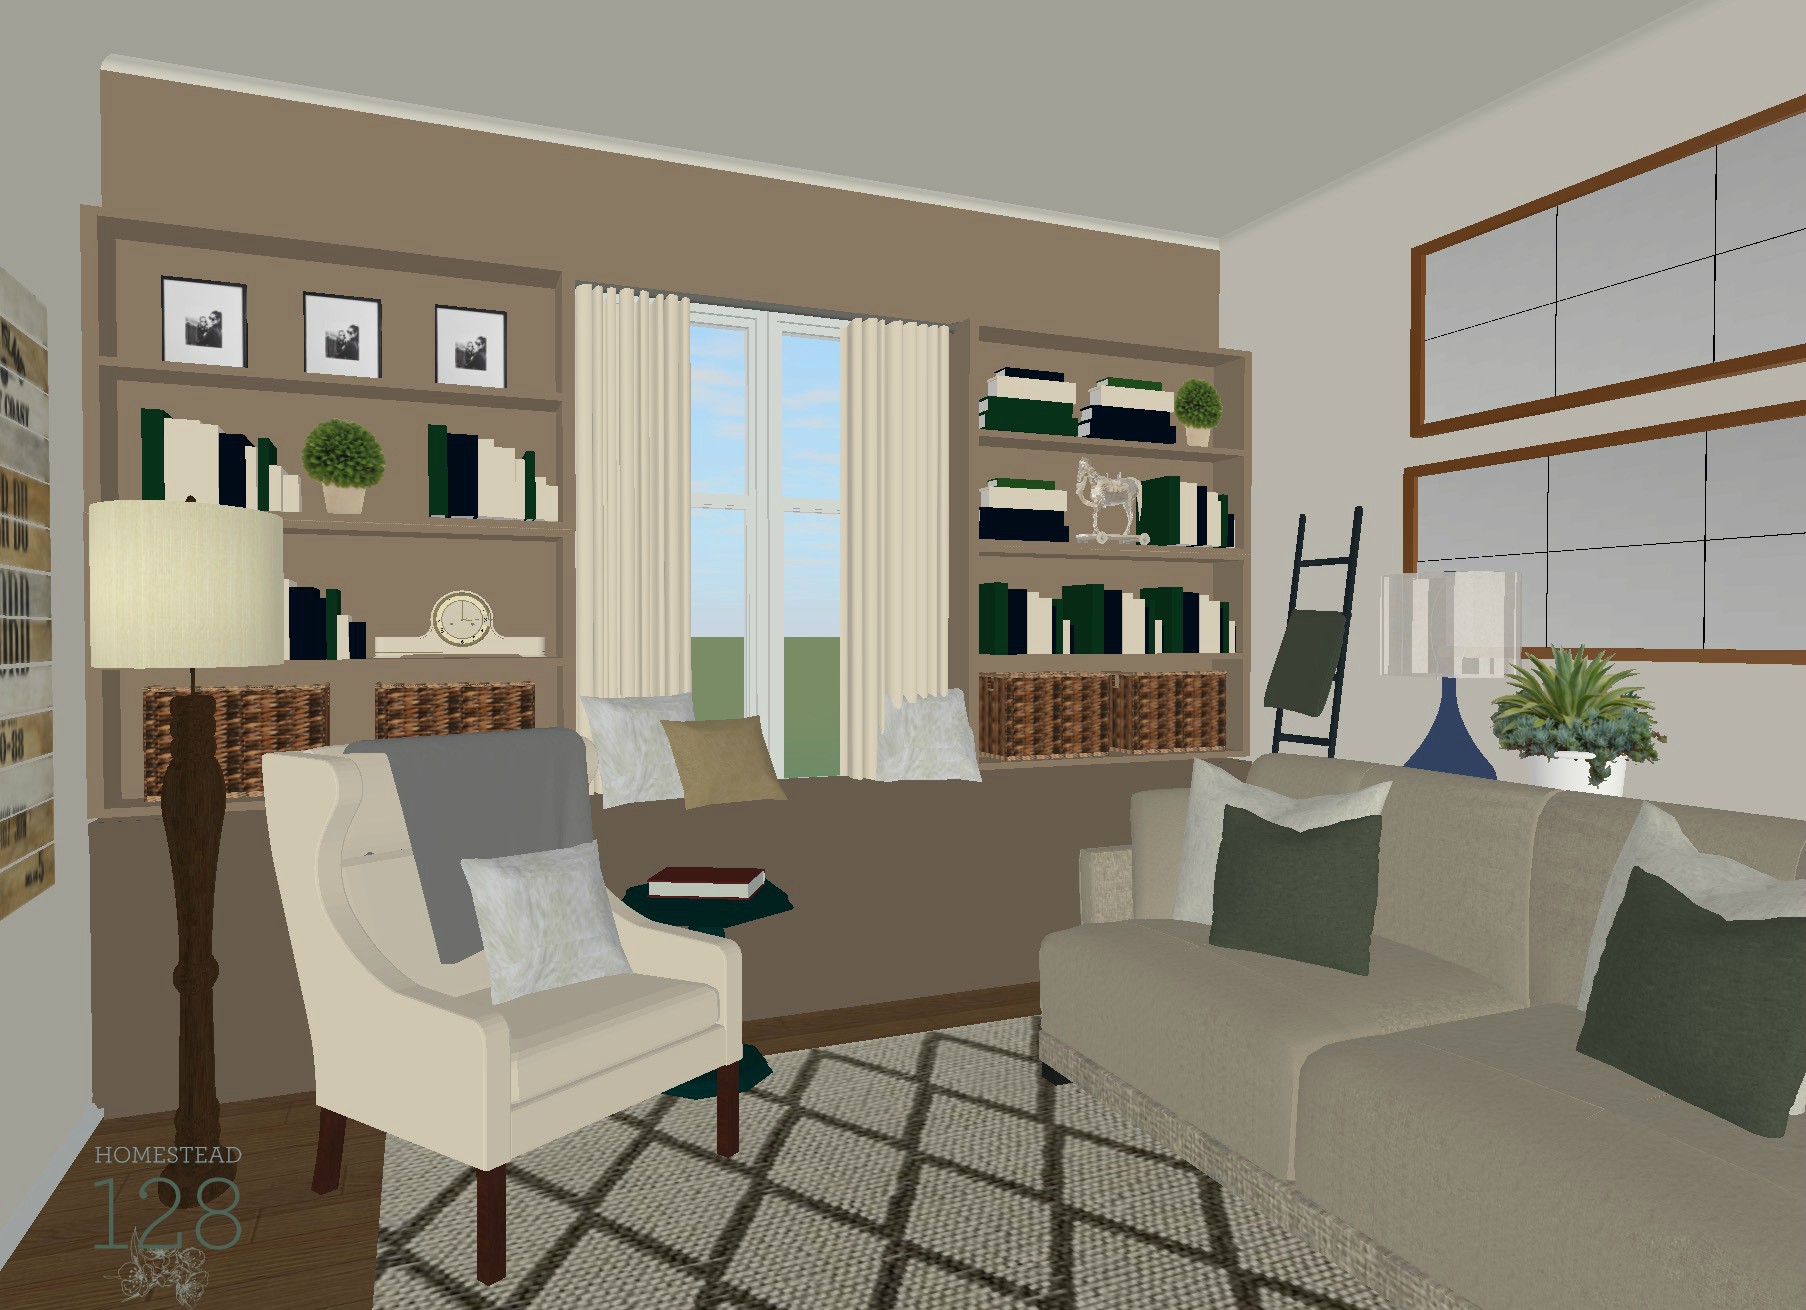 A traditional style living room design plan includes neutrals, blues, greens and a touch of farmhouse. Interior design service from Homestead 128.